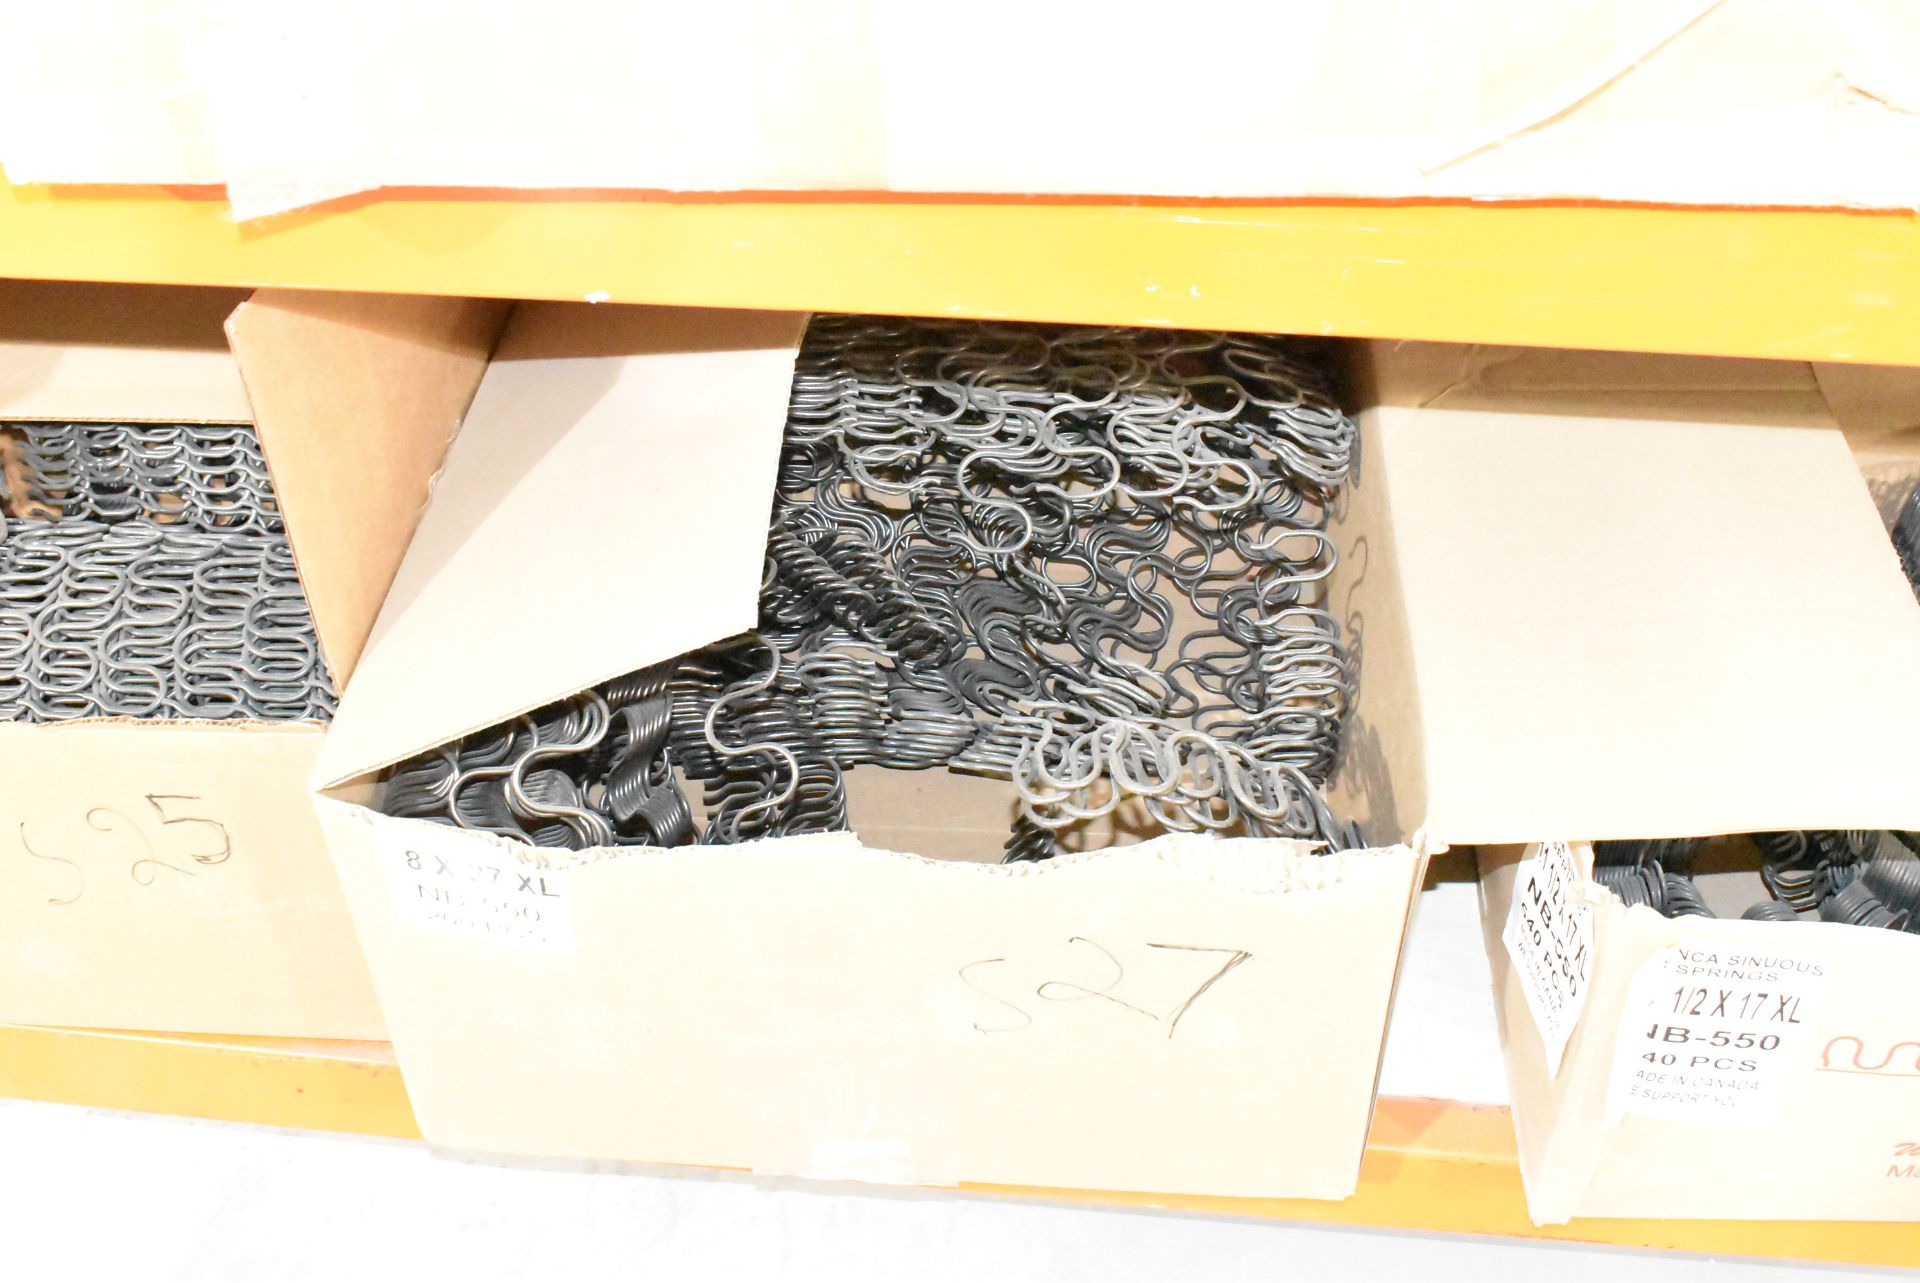 LOT/ CONTENTS OF RACK CONSISTING OF CUSHION FOAM & SPRINGS - Image 11 of 12